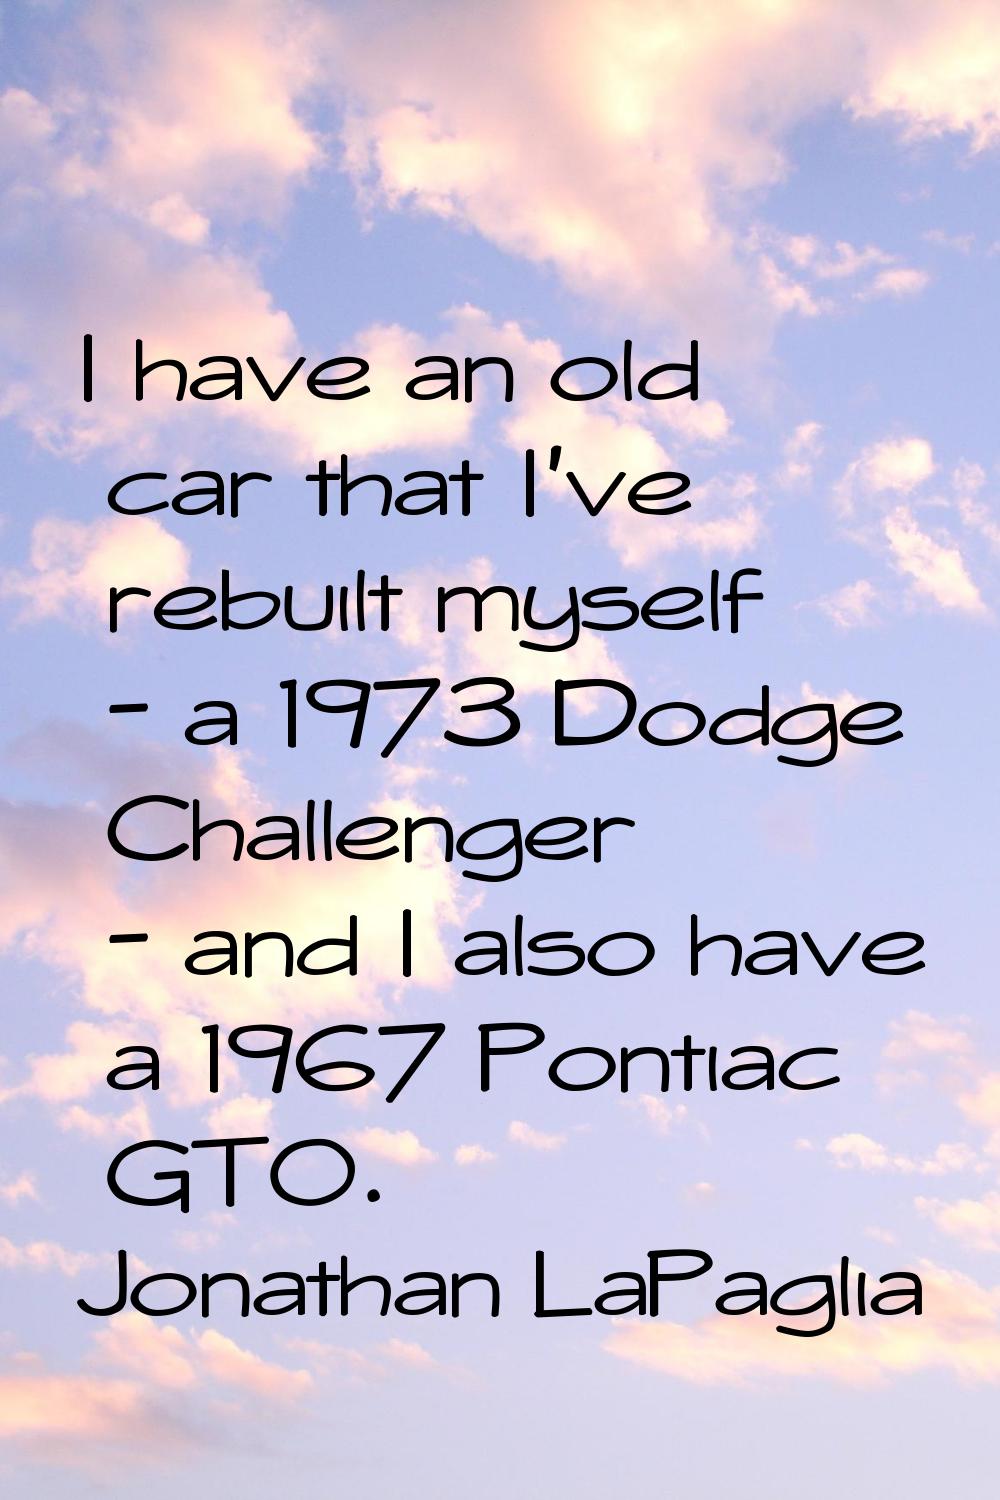 I have an old car that I've rebuilt myself - a 1973 Dodge Challenger - and I also have a 1967 Ponti